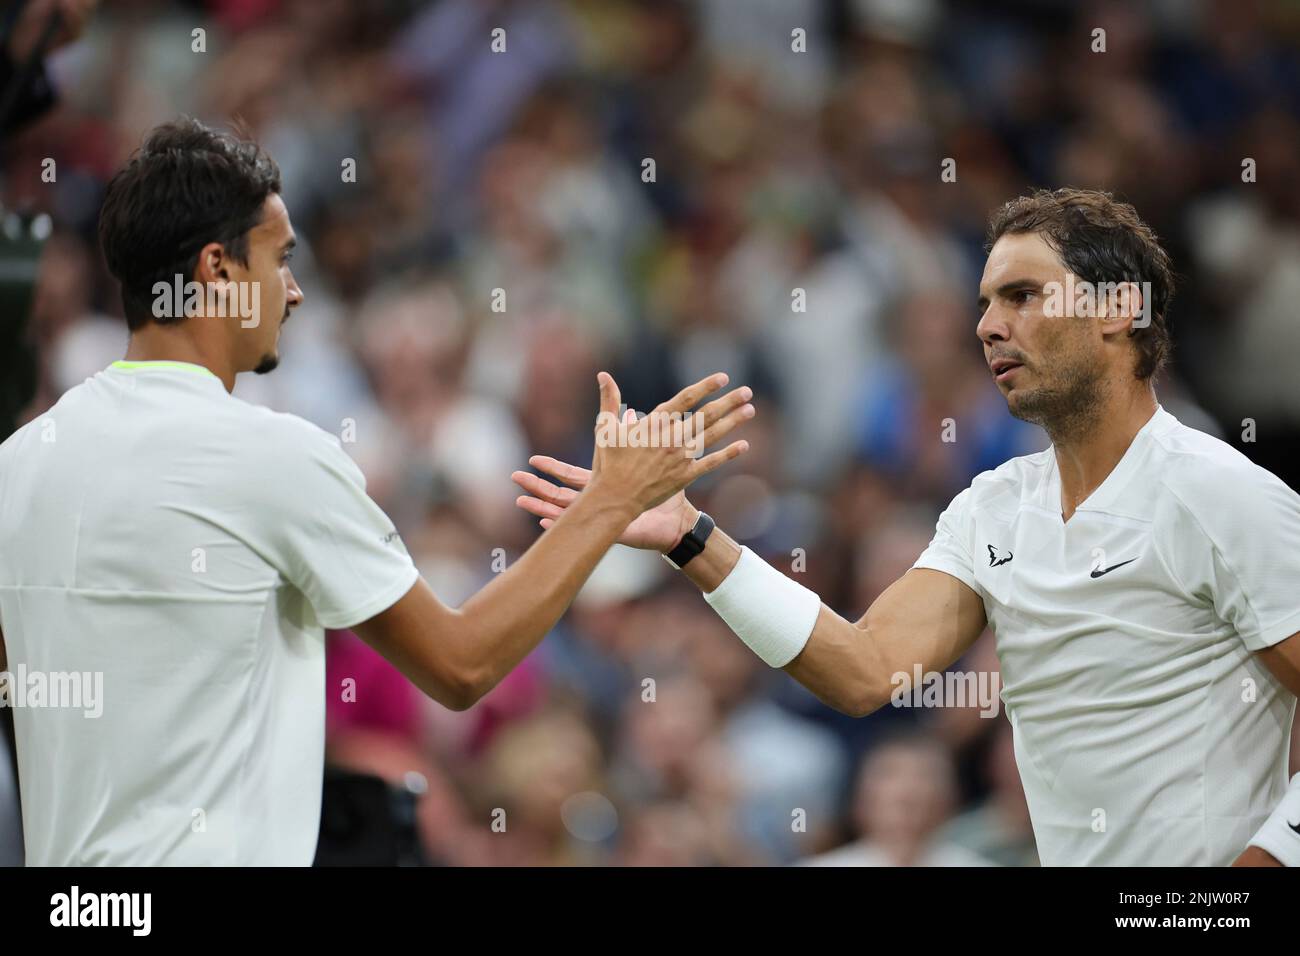 Rafael Nadal (R) of Spain defeats Lorenzo Sonego of Italy during the game of the gentlemens singles third-round match in the Championships, Wimbledon at All England Lawn Tennis and Croquet Club in